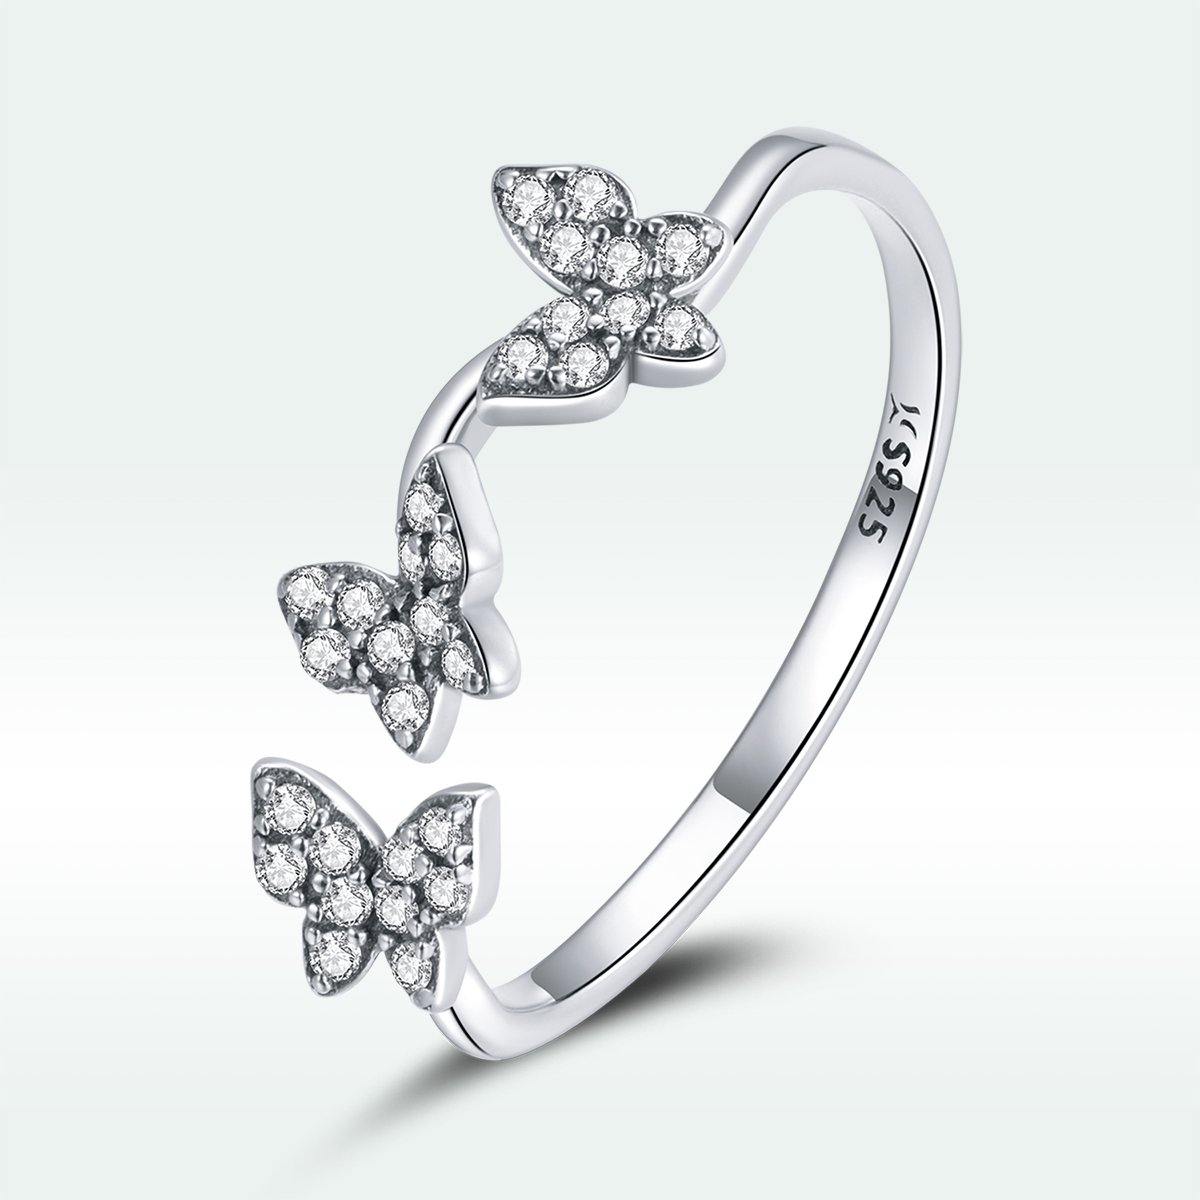 Shiny Butterflies 925 Sterling Silver Ring - Aisllin Jewelry